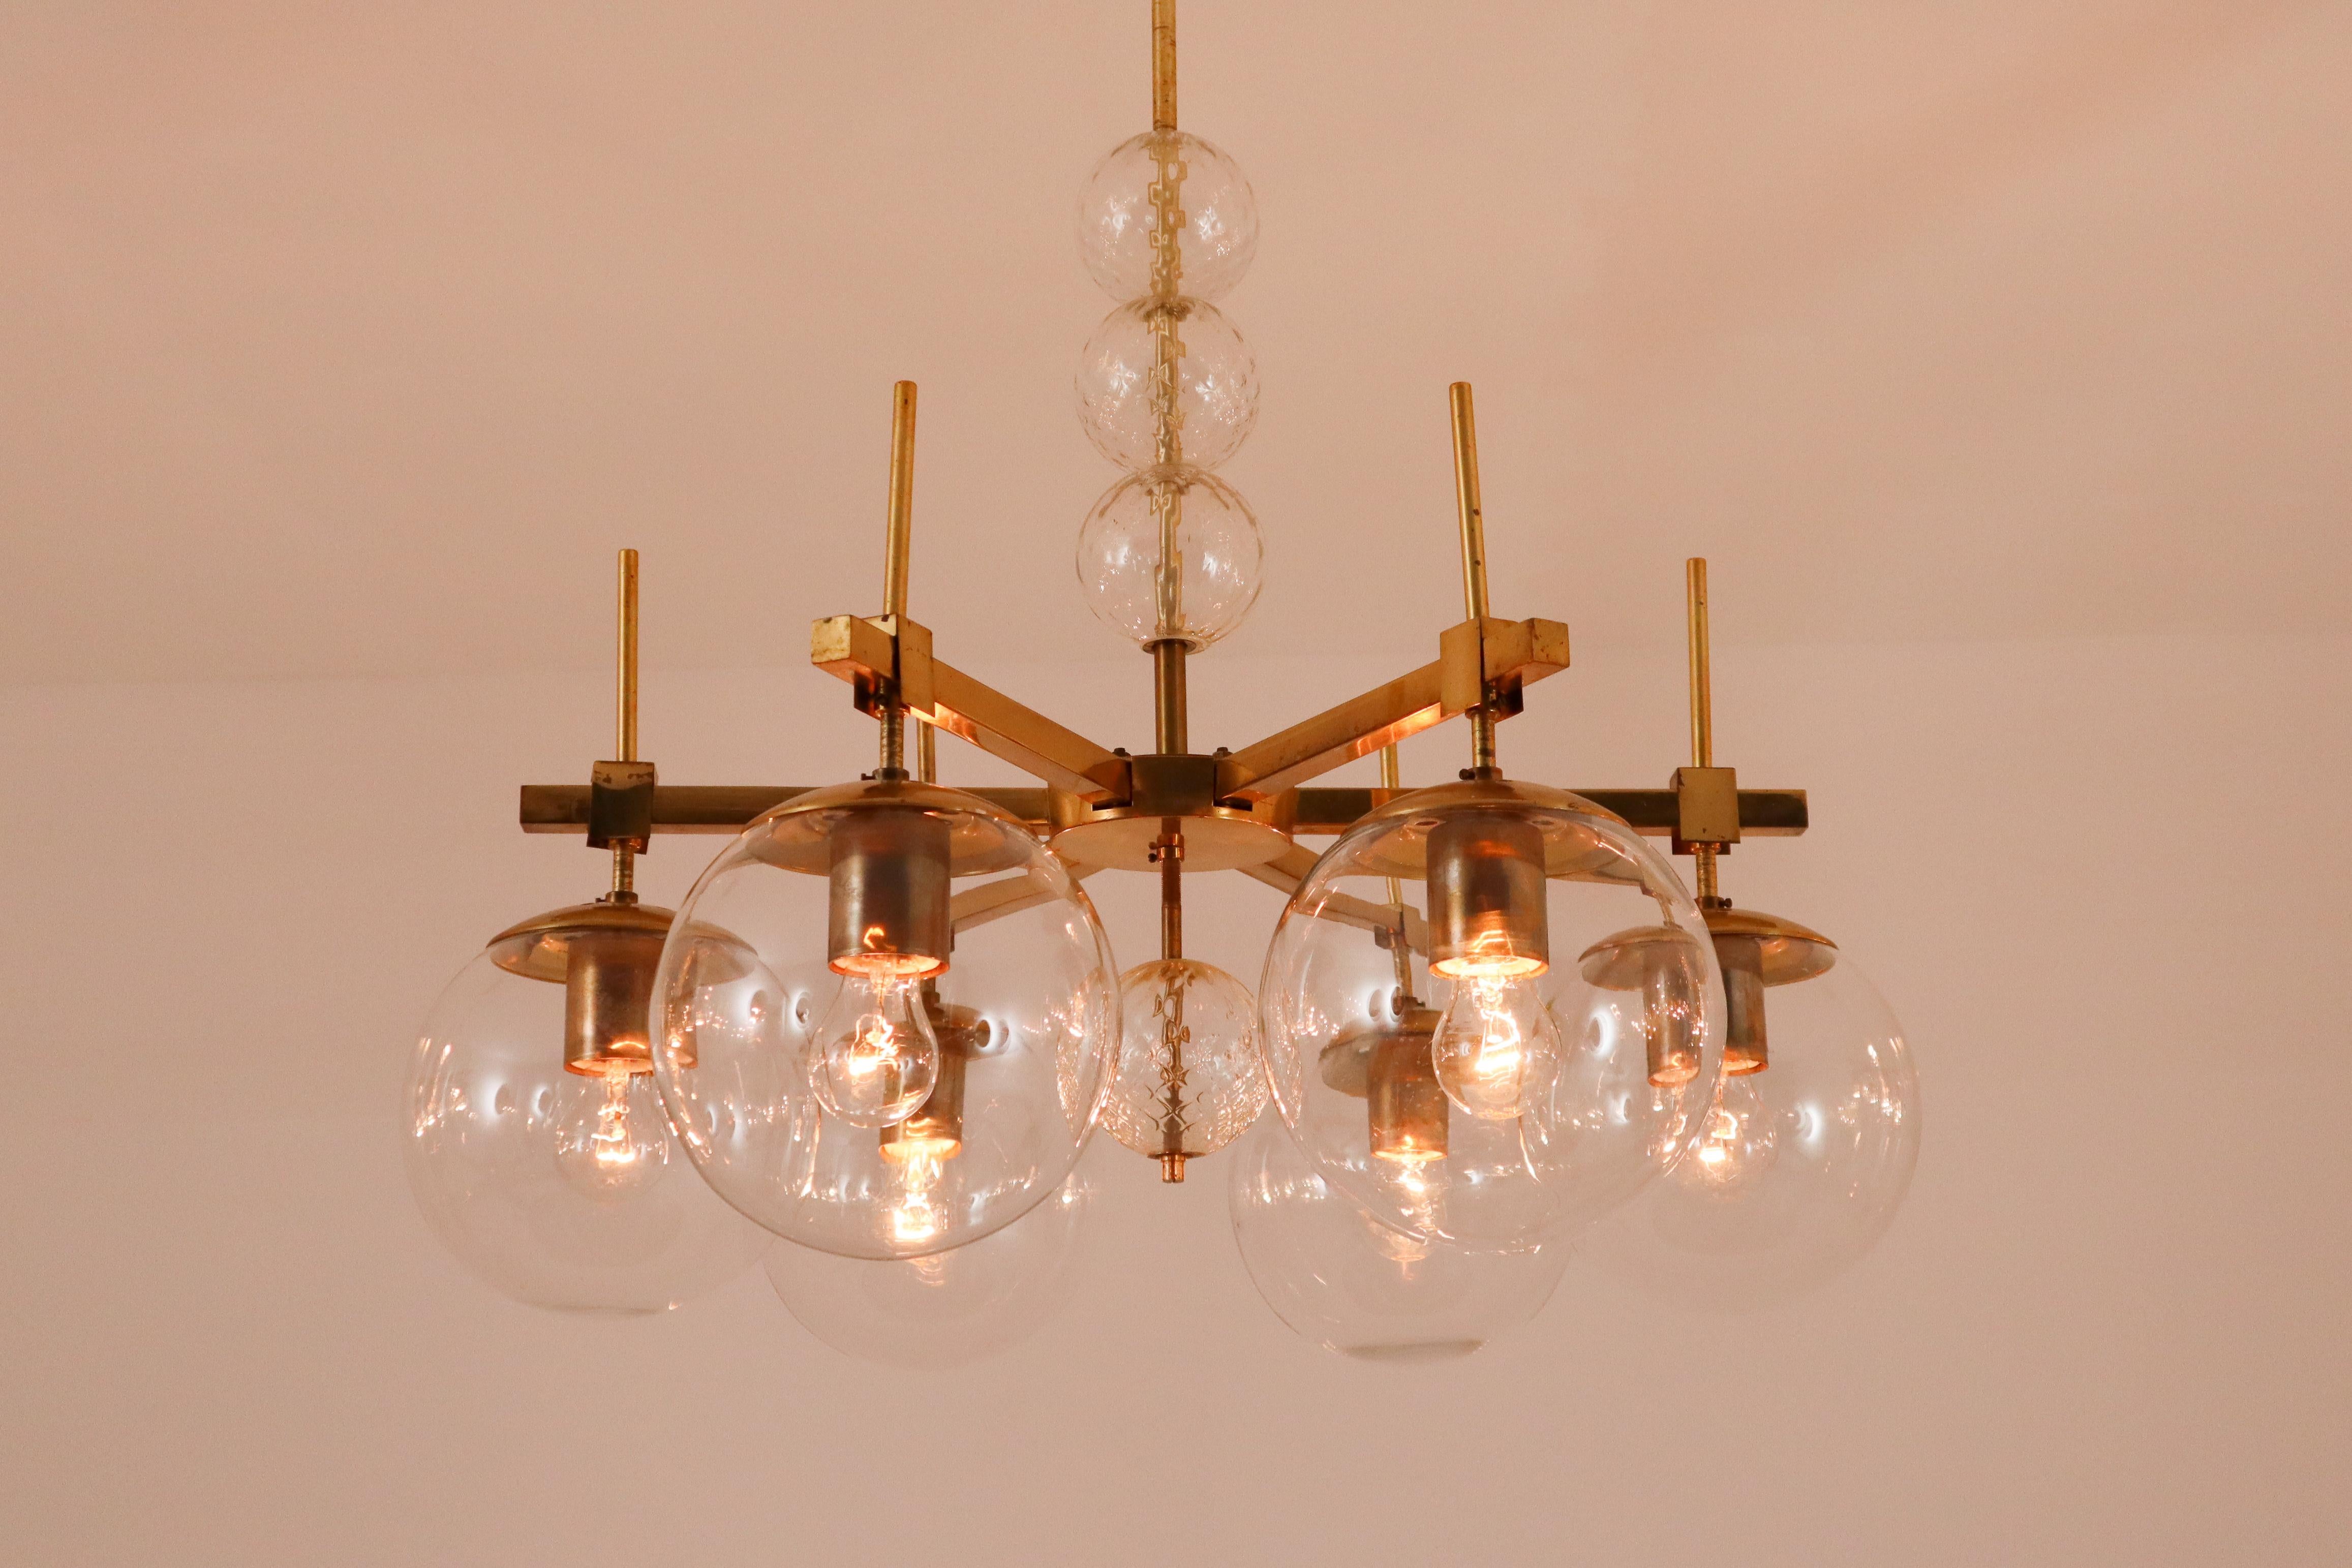 Six Midcentury Chandeliers with Brass Fixture and Hand-Blown Glass, Europe 3